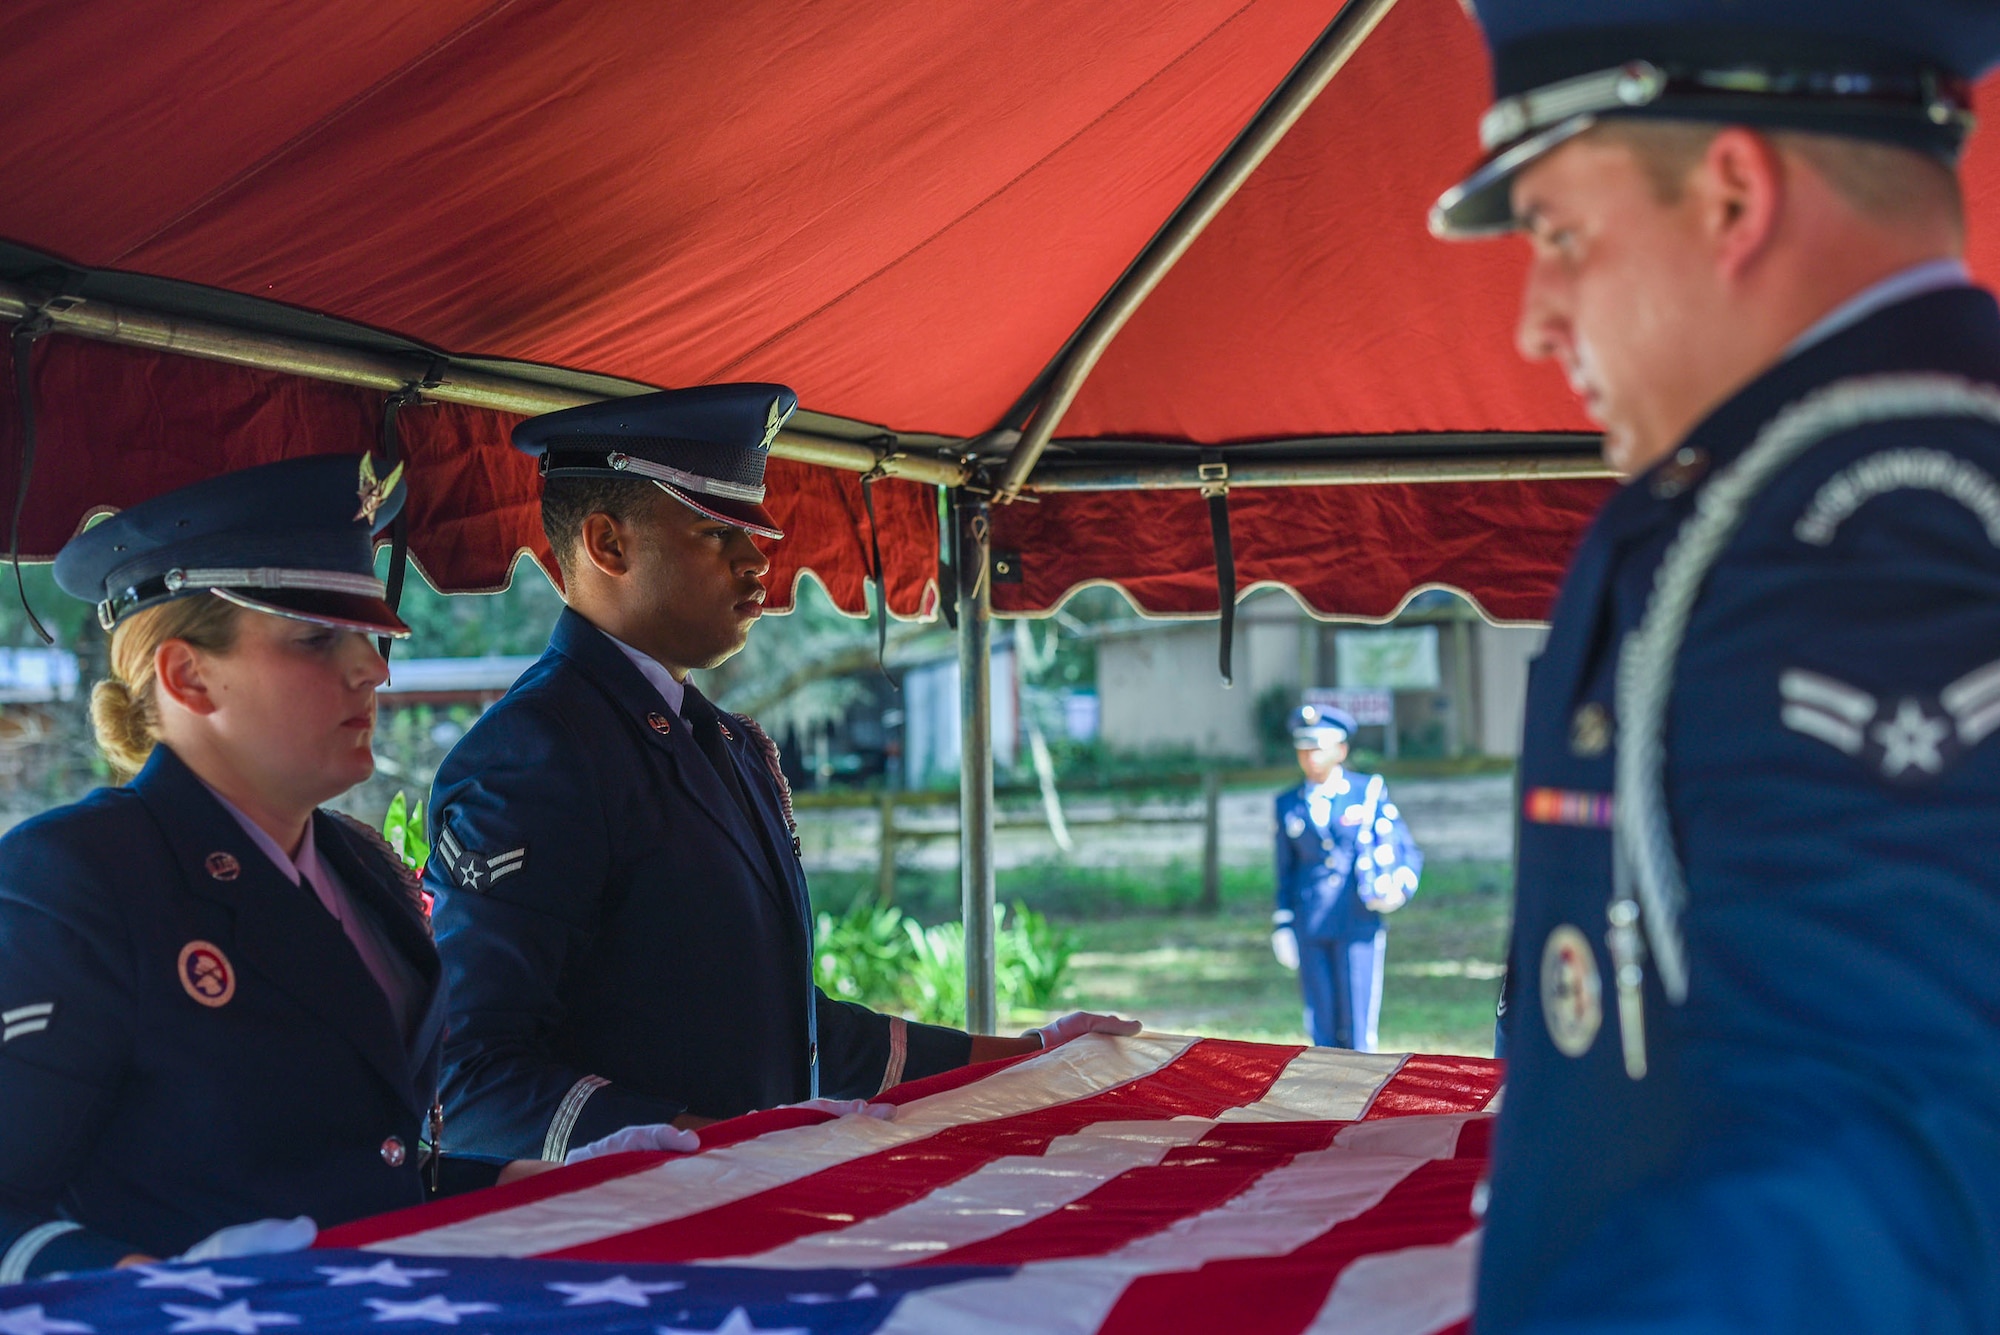 Members of the Moody Air Force Base Honor Guard, prepare to fold a flag during a funeral in honor of  Staff Sgt. Darryl Smith, Oct. 17, 2016, in Sparr, Fla. Smith was a laboratory technician assigned to the 509th Medical Support Squadron, Whiteman Air Force Base, Mo., who passed away in his home, Oct. 8. (U.S. Air Force photo by Airman 1st Class Greg Nash)